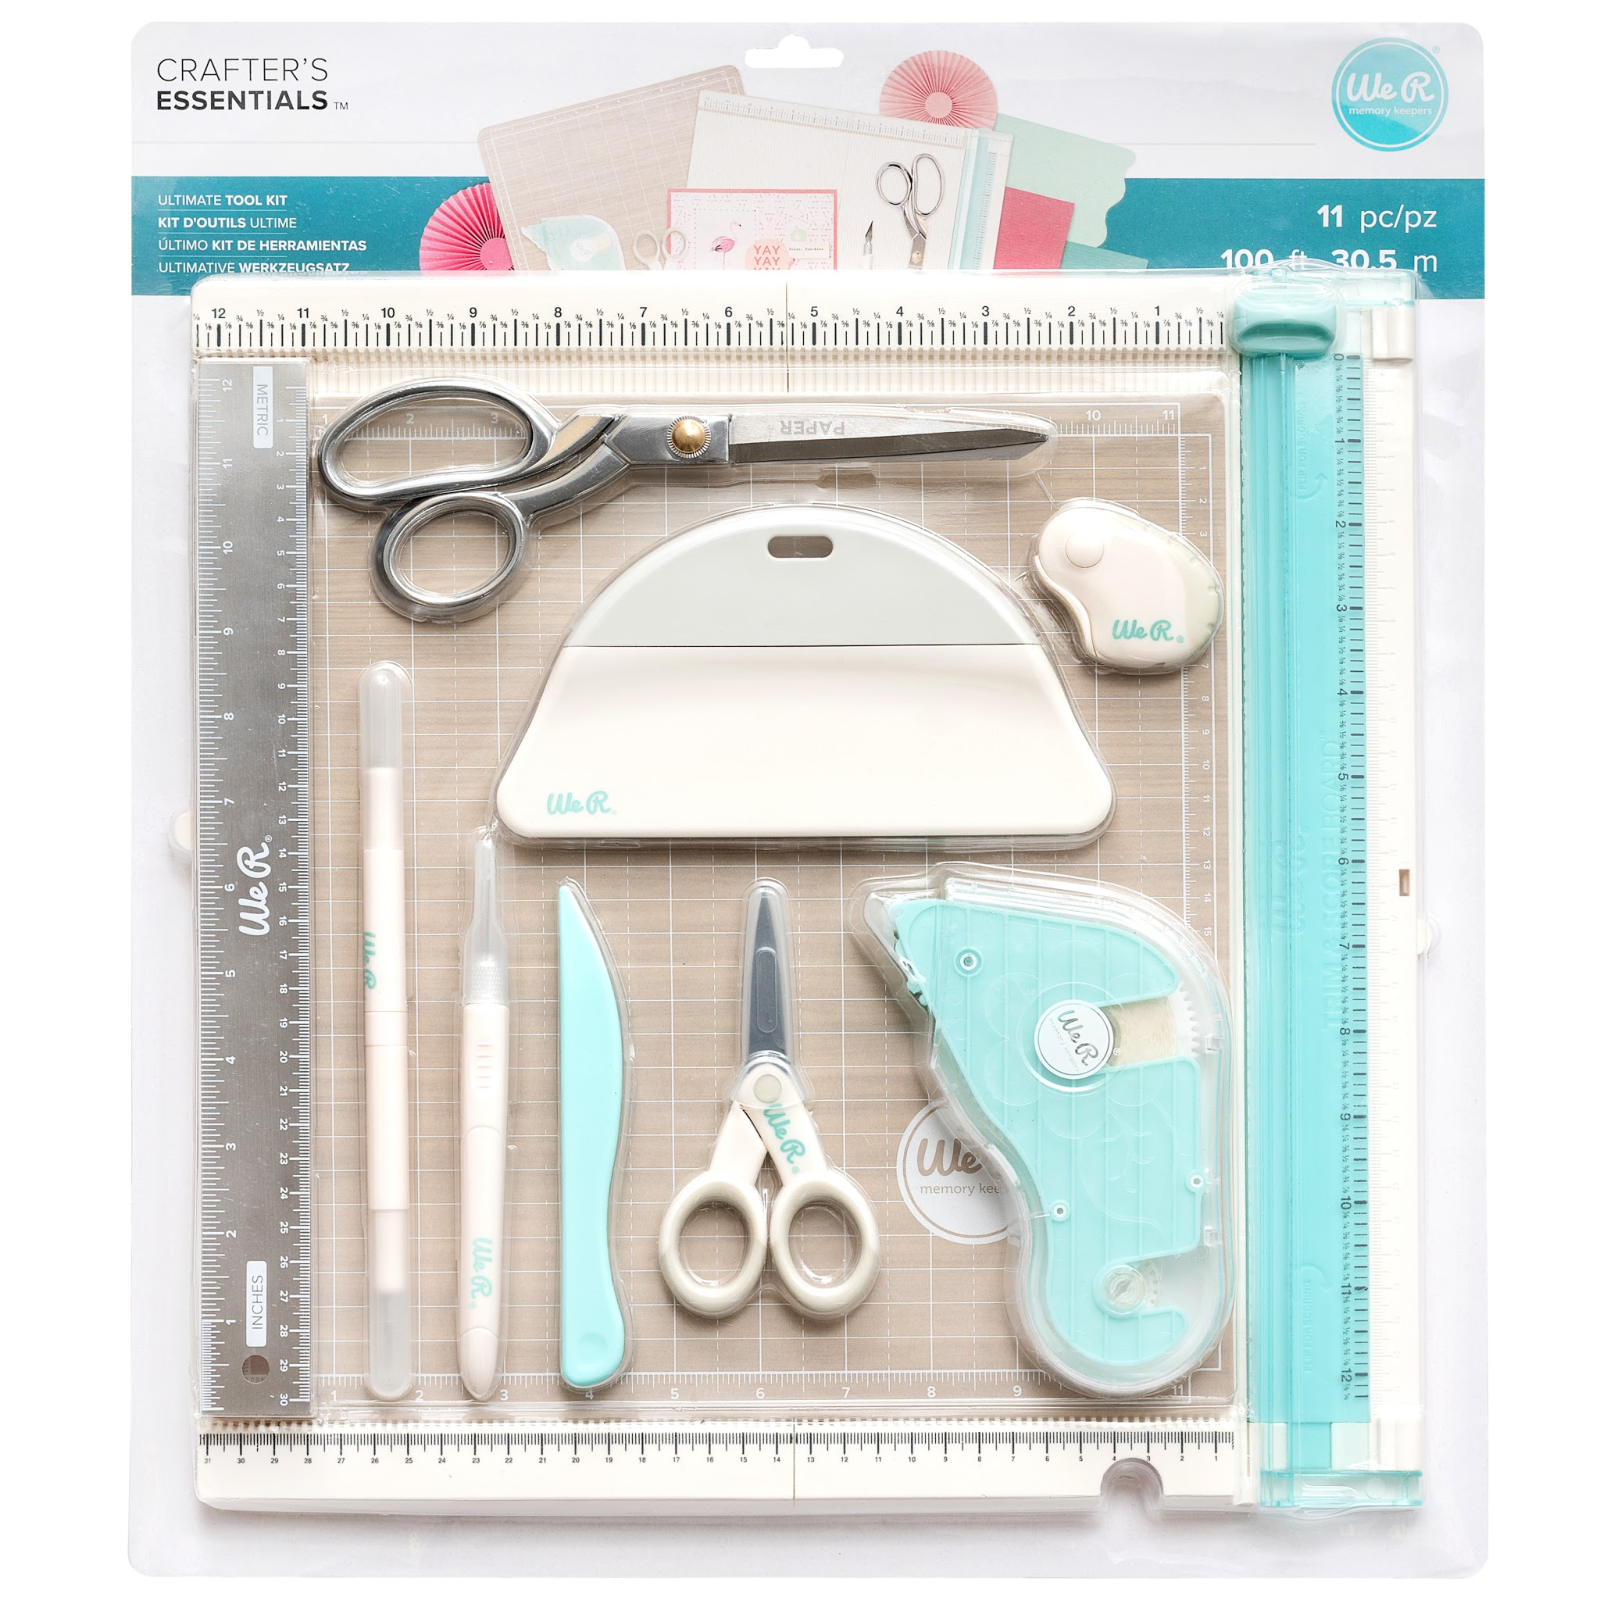  We R Memory Keepers Mini Tool Kit Pink, with Cutting Mat,  Ruler, Scissors, Craft Knife, Tweezers, Brad Setter, and Piercing Tool, DIY  Craft Projects, Scrapbooking, Journaling, Card Making, and More